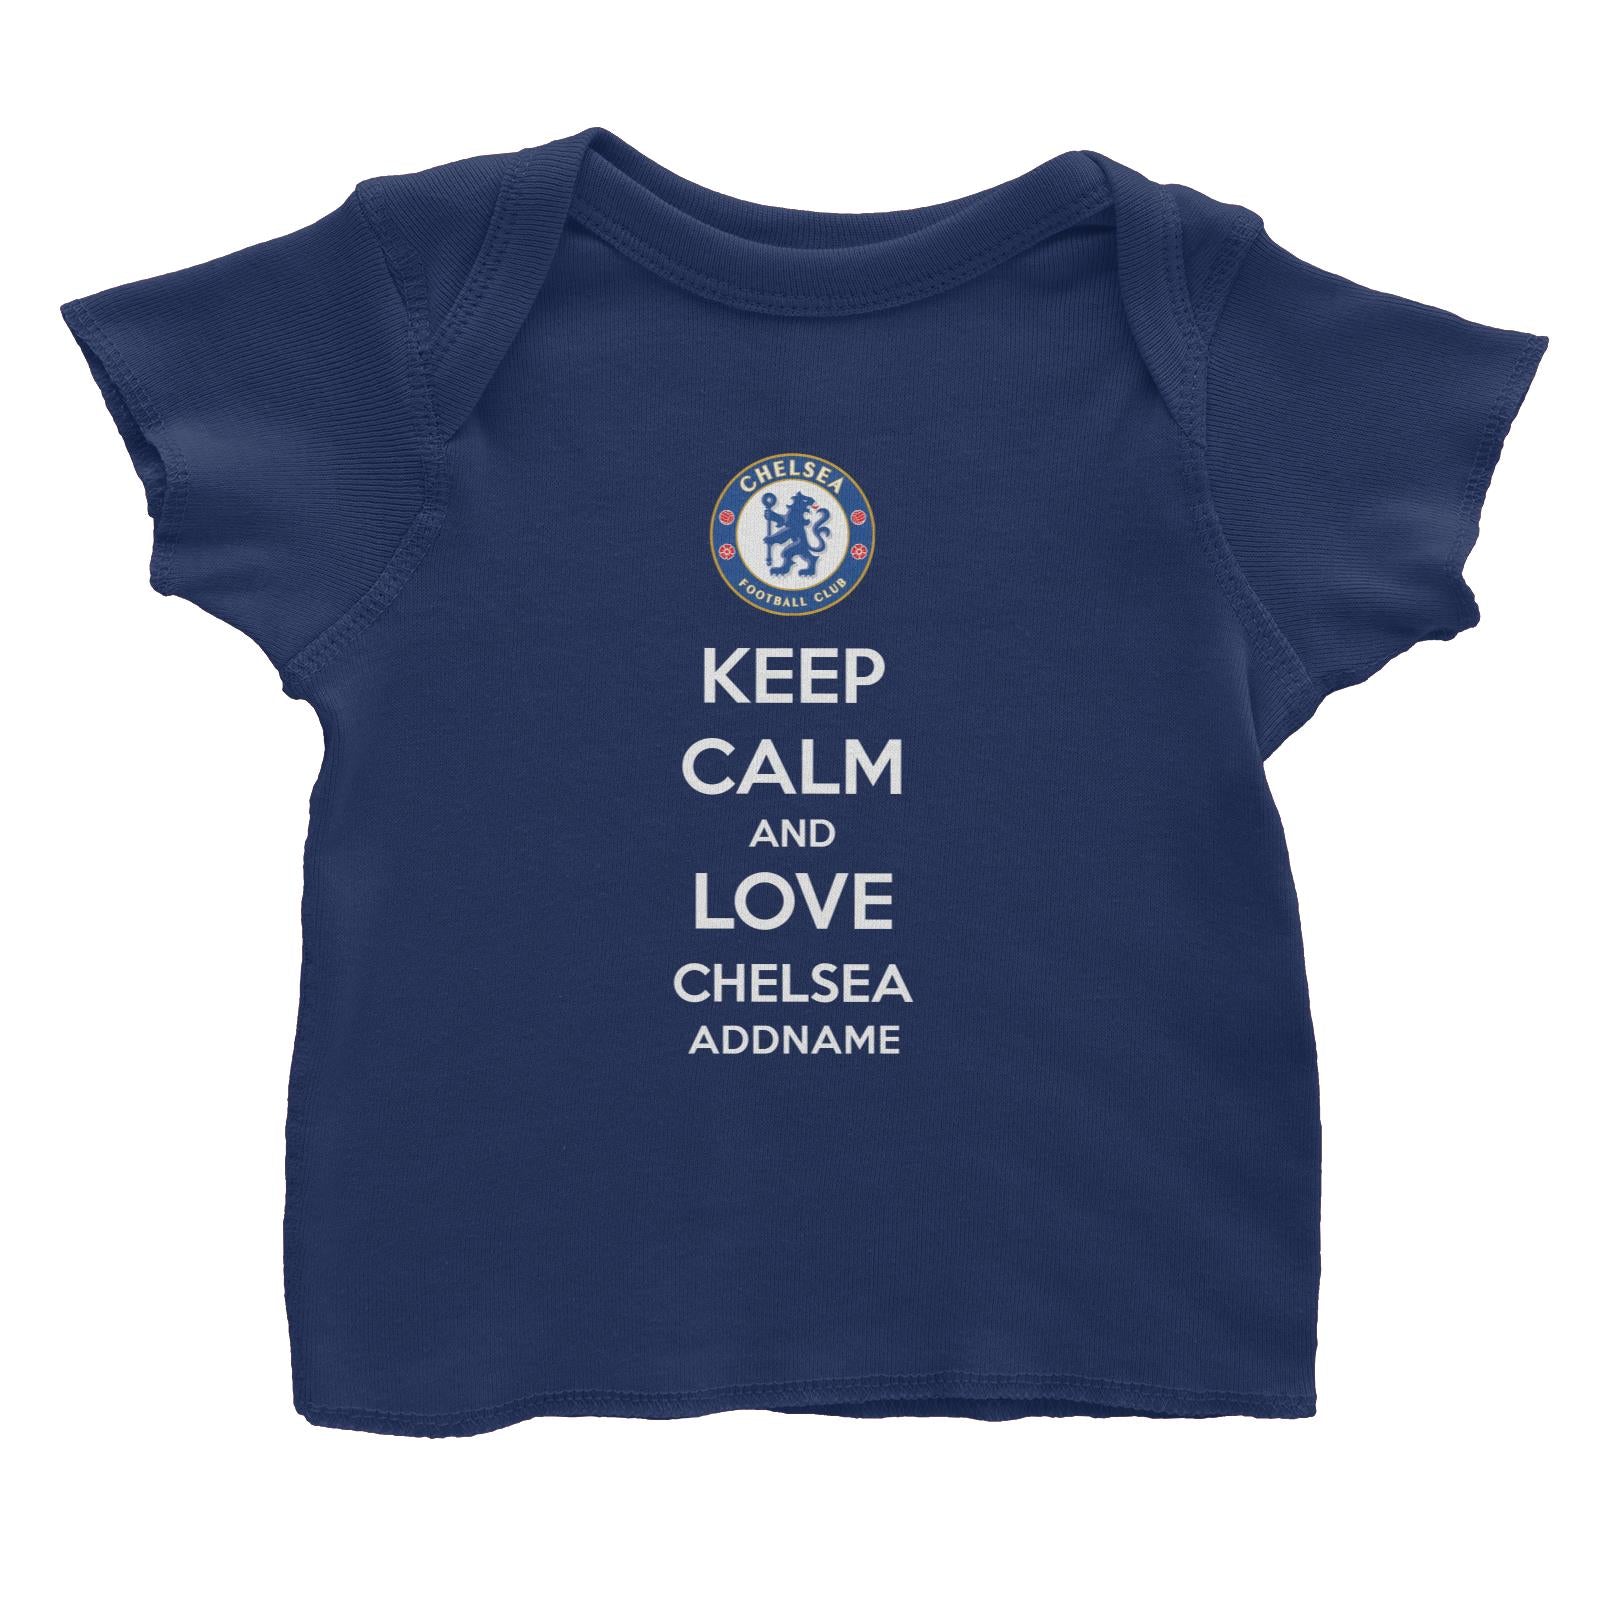 Chelsea Football Keep Calm And Love Series Addname Baby T-Shirt